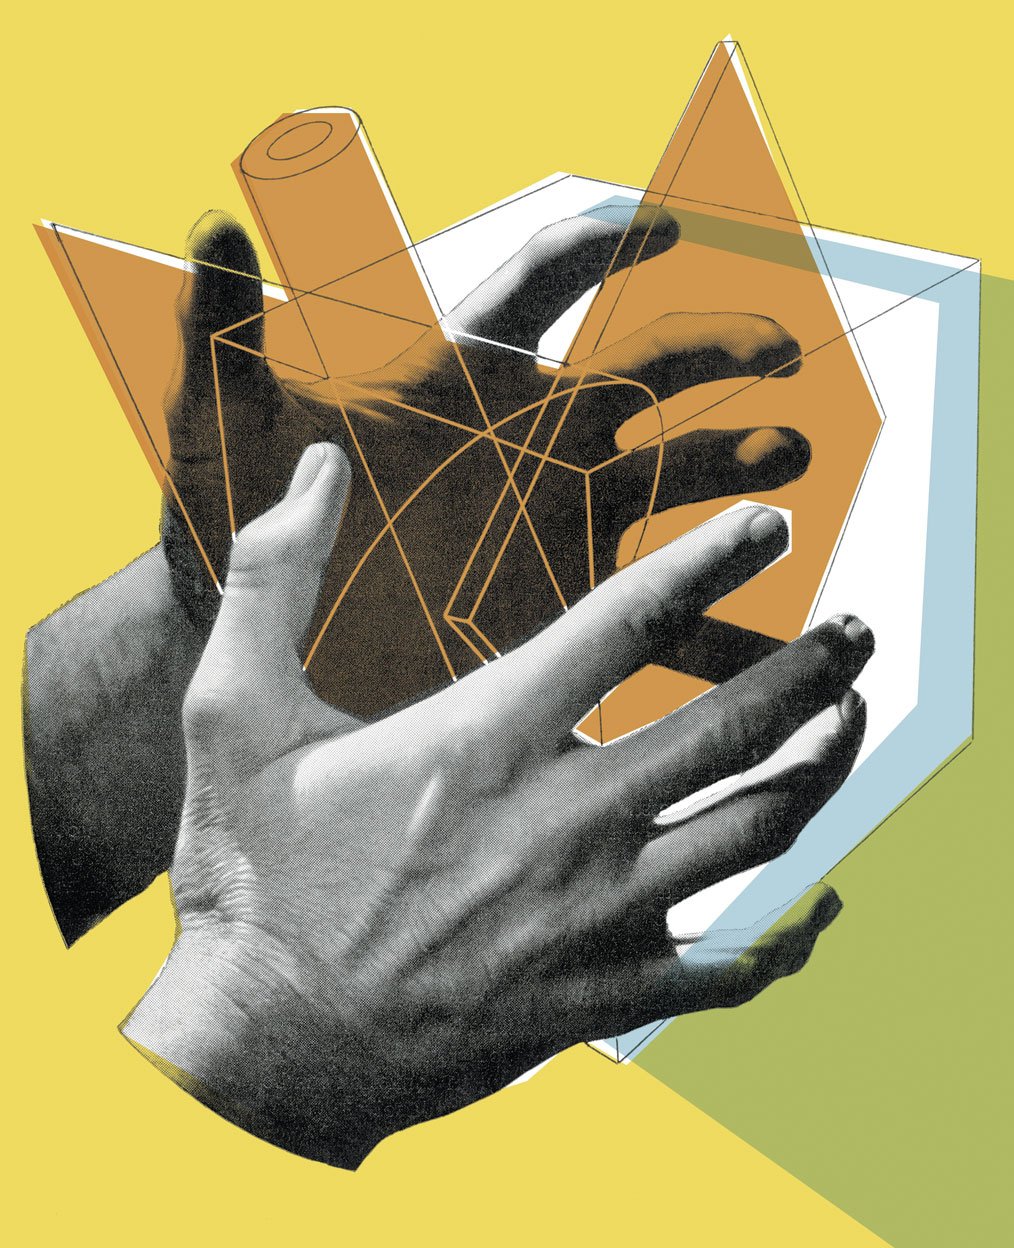 Abstract hands representing Hiring a web design company in Ireland